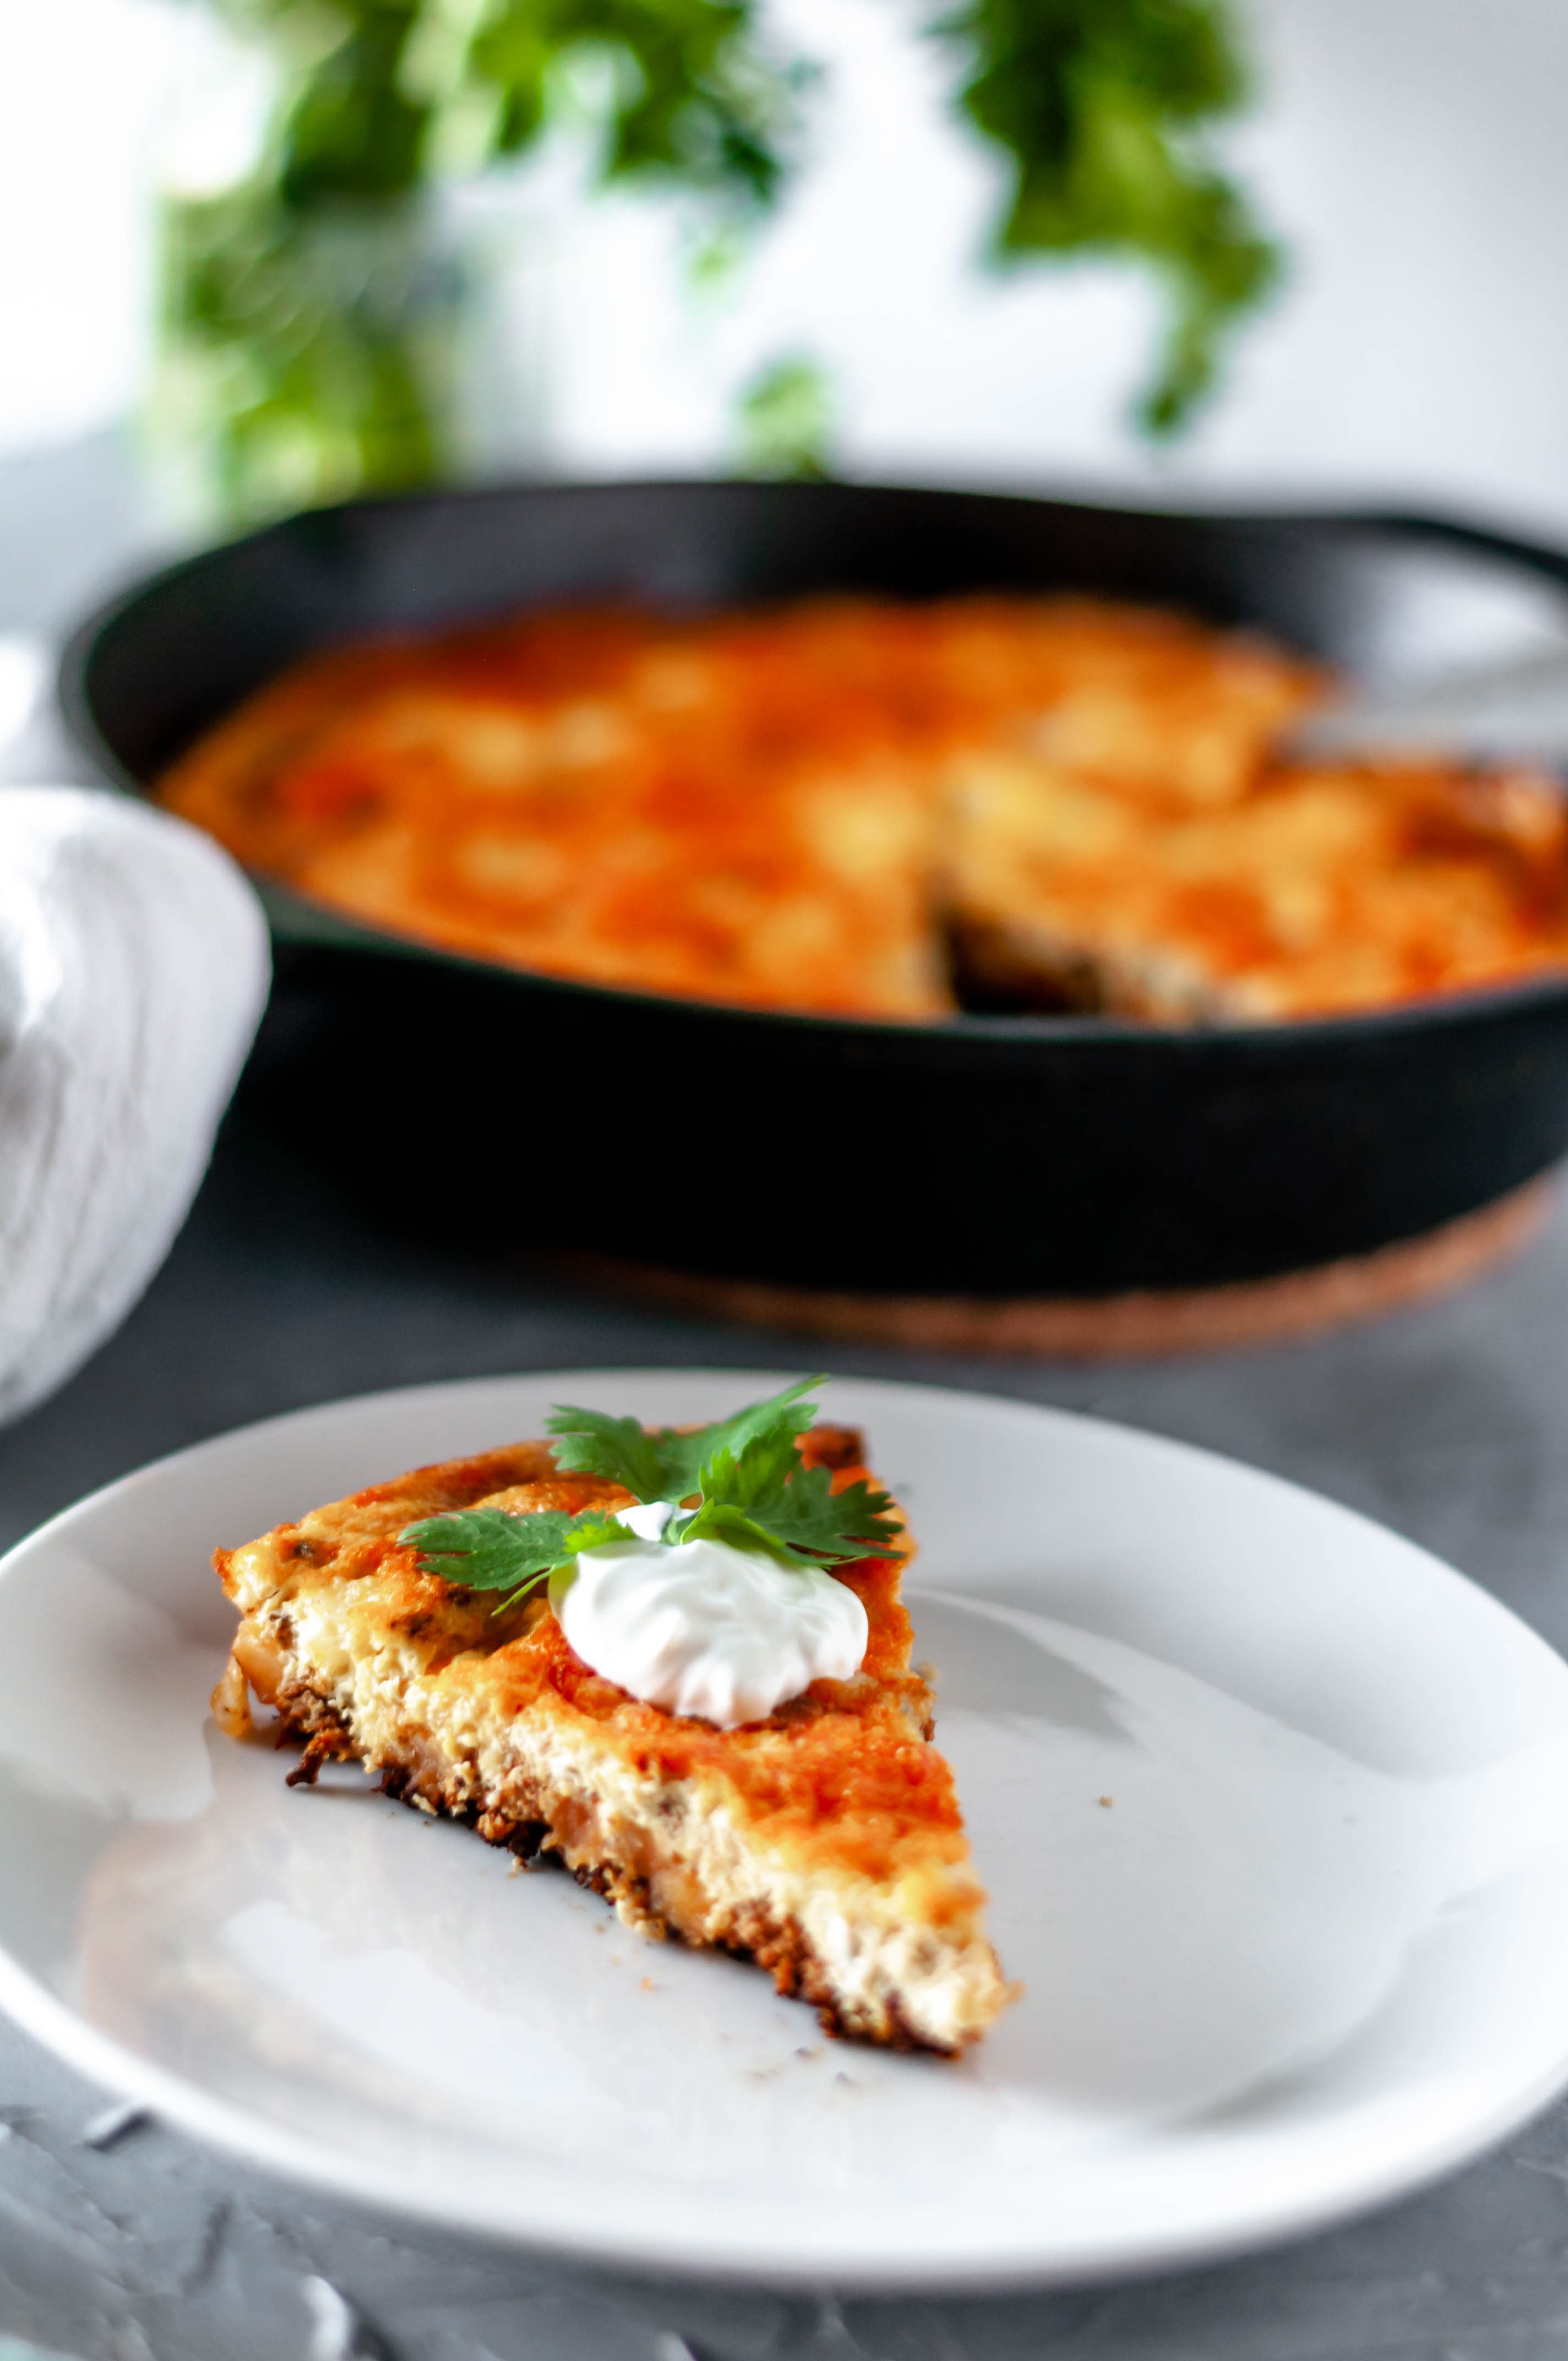 Your Mothers Day just got a lot better with this Spicy Chorizo Frittata. Wow mom with a fancy brunch and make this super simple frittata the star.